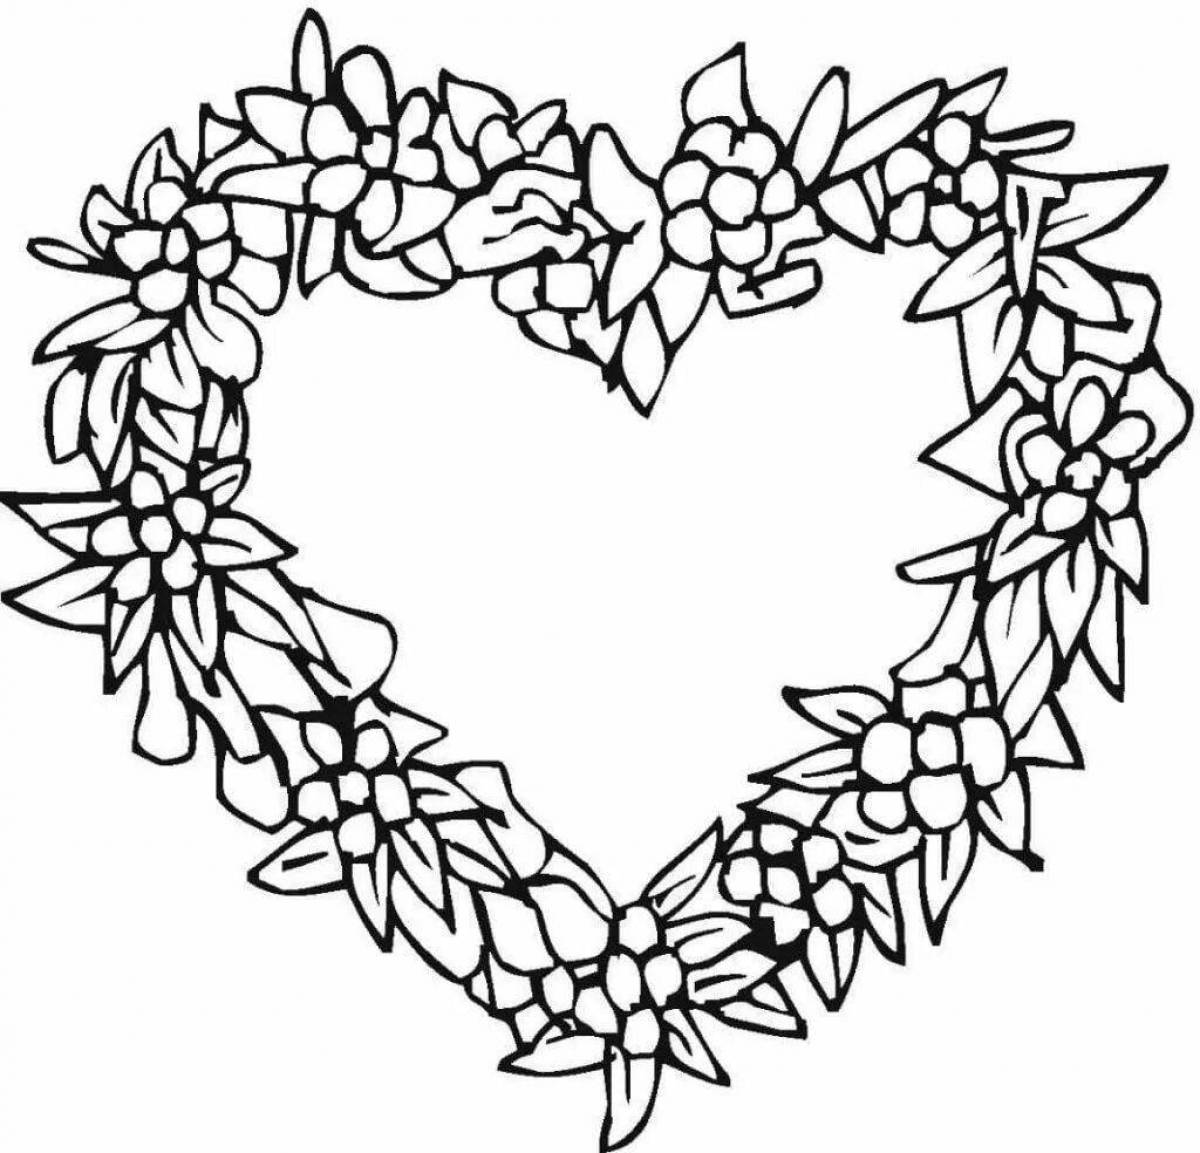 Shining heart coloring page